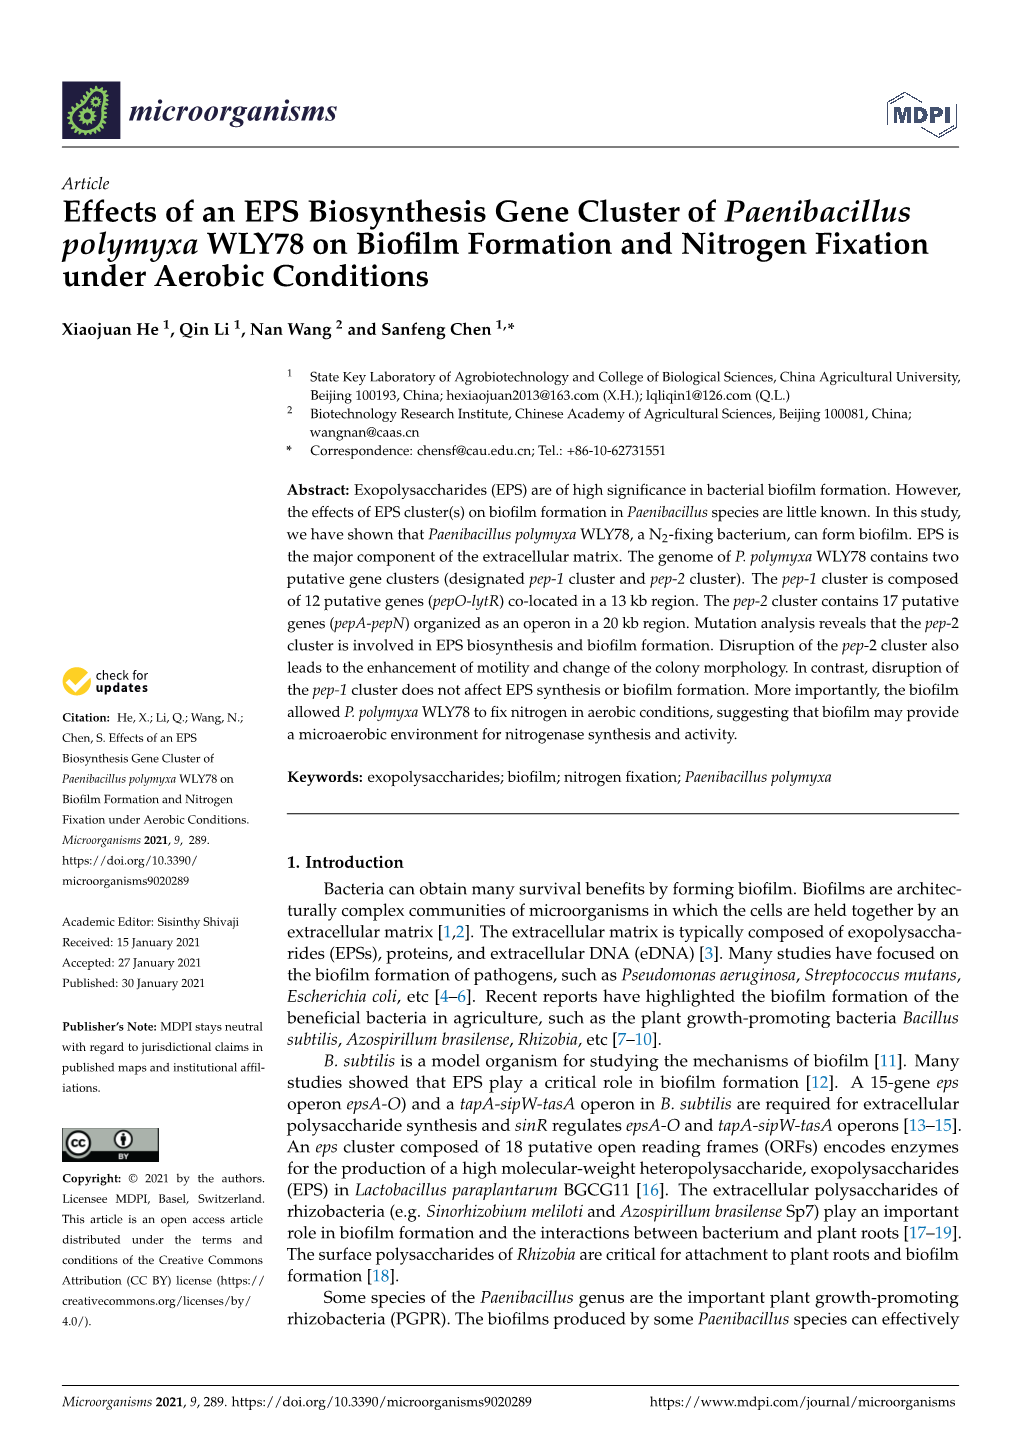 Effects of an EPS Biosynthesis Gene Cluster of Paenibacillus Polymyxa WLY78 on Bioﬁlm Formation and Nitrogen Fixation Under Aerobic Conditions